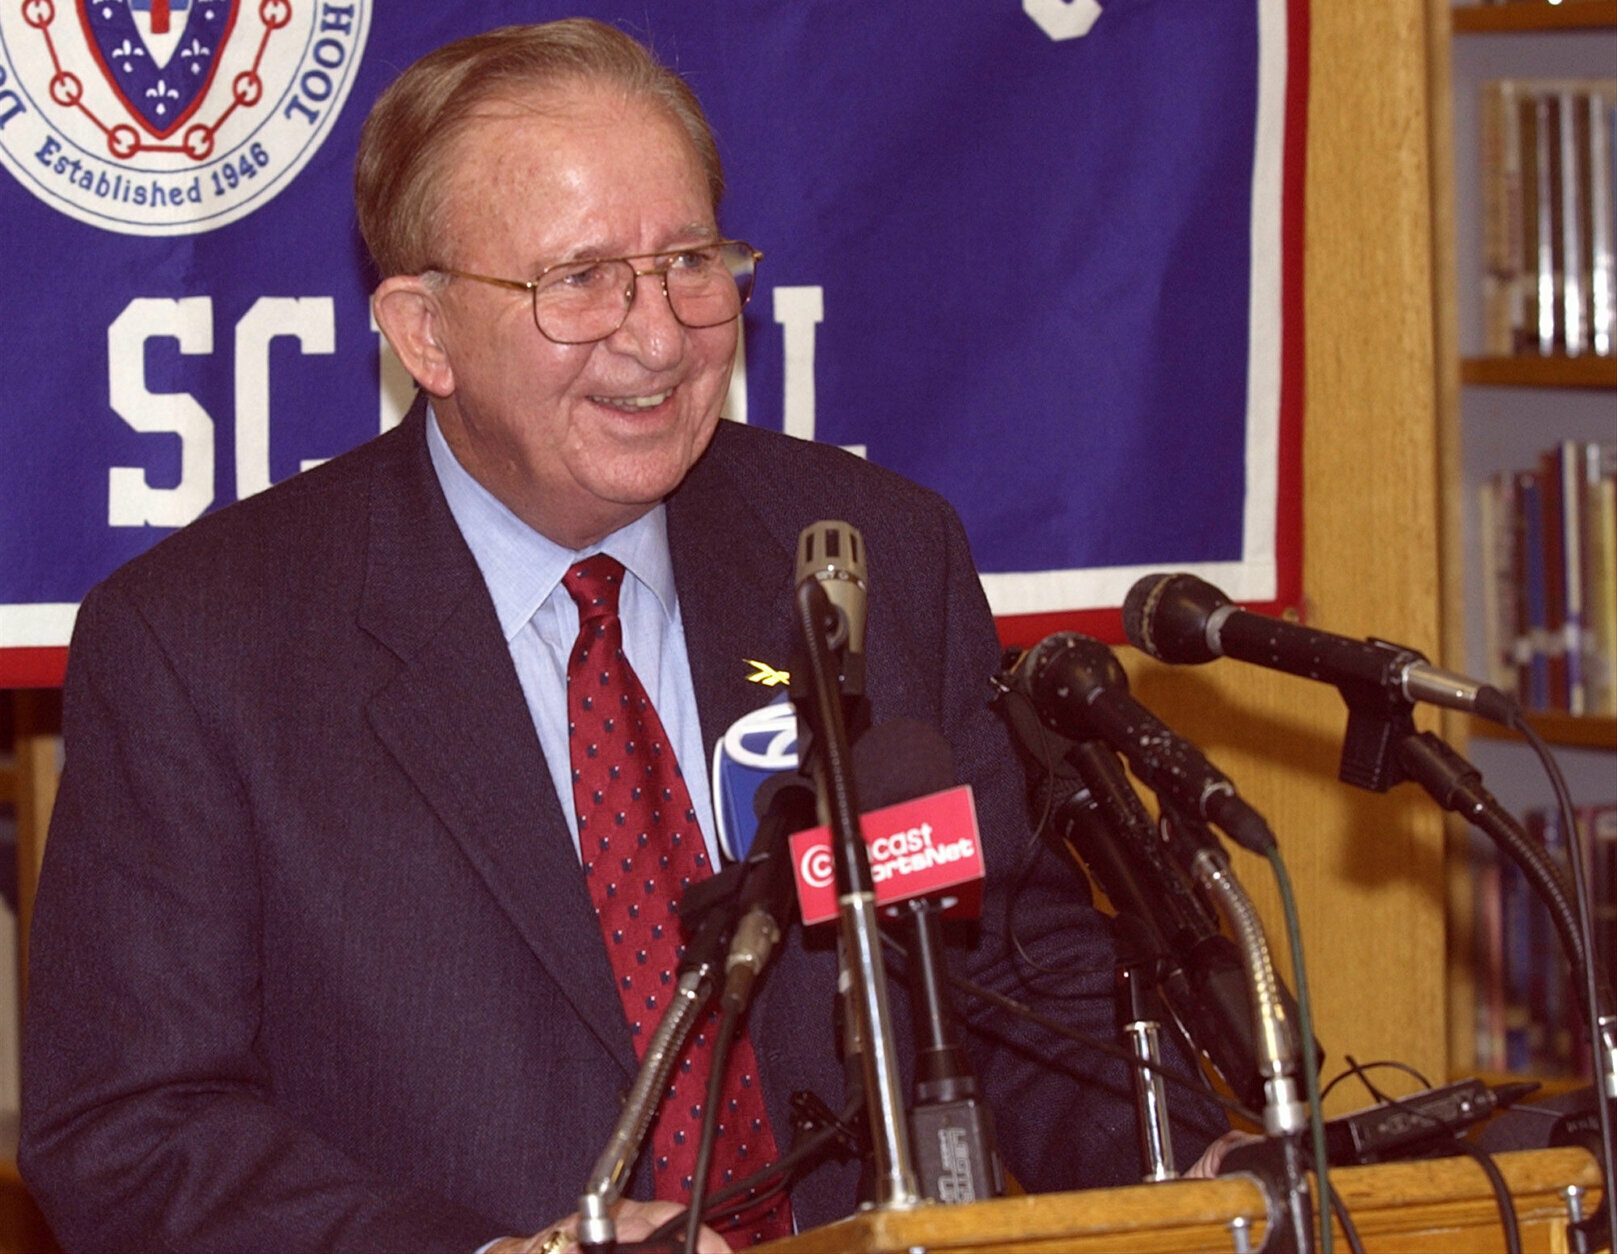 Morgan Wootten, head basketball coach at DeMatha High School smiles at a press conference to announce his stepping down as coach, Wednesday, Nov. 6, 2002, in Hyattsville, Md. Wootten's career record is 1,274-192. (AP Photo/Nick Wass)